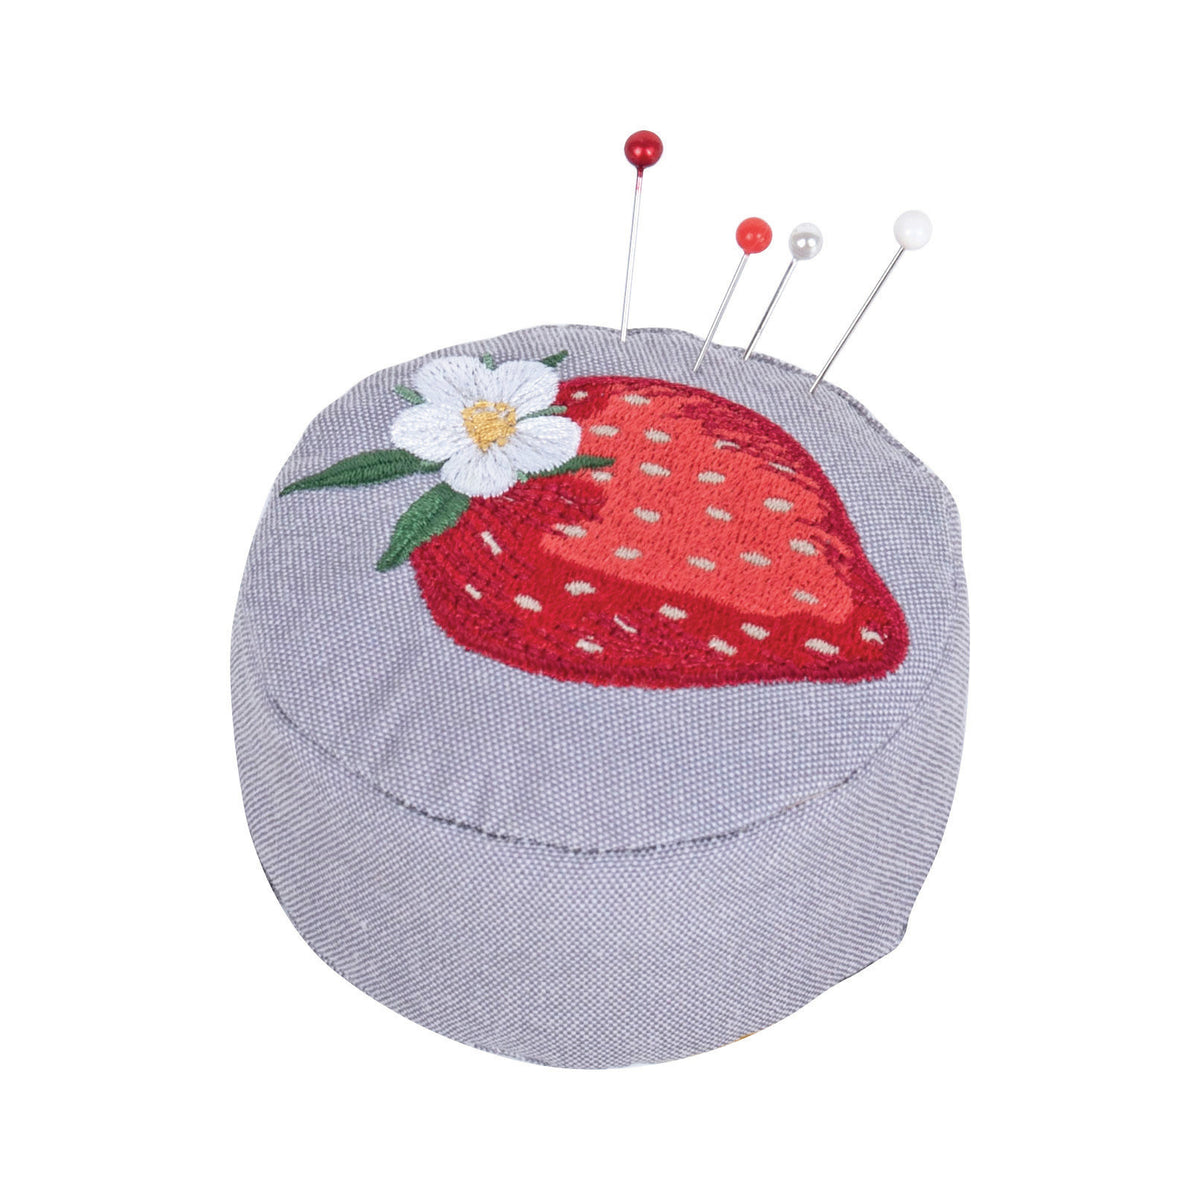 Wrist Strap Strawberry Pin Cushion Hobbygift | Sewing Boxes and Storage